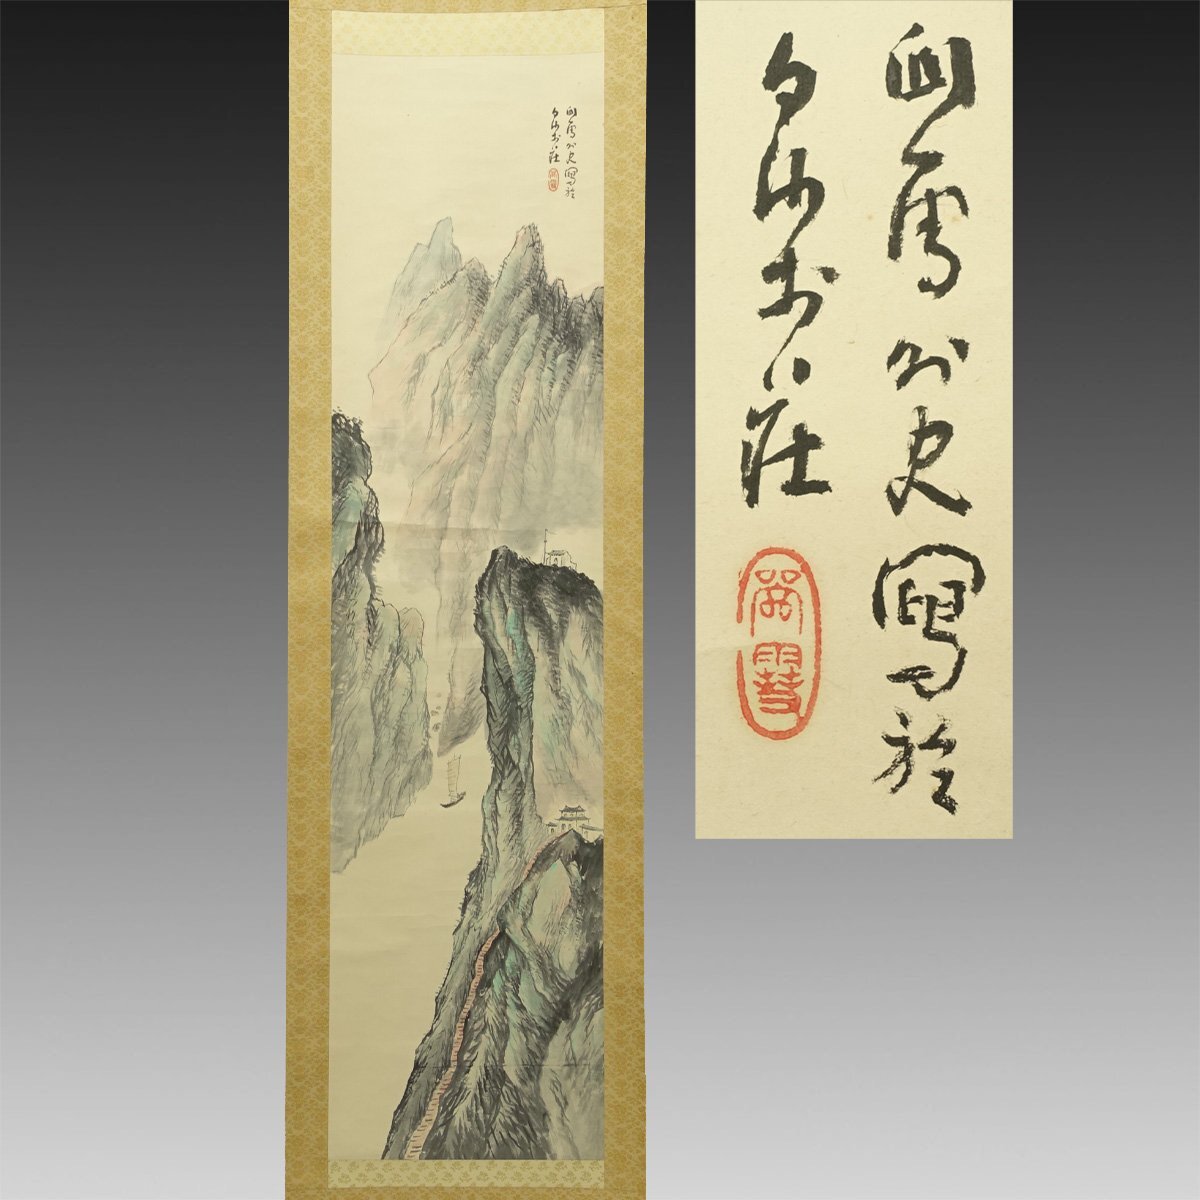 [Authentic Work] Kimon ◆ Hashimoto Kansetsu Chinese Landscape Painting (Late Spring View of Mountains and Mountains) 1 width Old handwriting Old document Old book Japanese painting Modern painting Literati painting Chinese painting Tea ceremony Kyoto Taisho - Showa period, artwork, book, hanging scroll